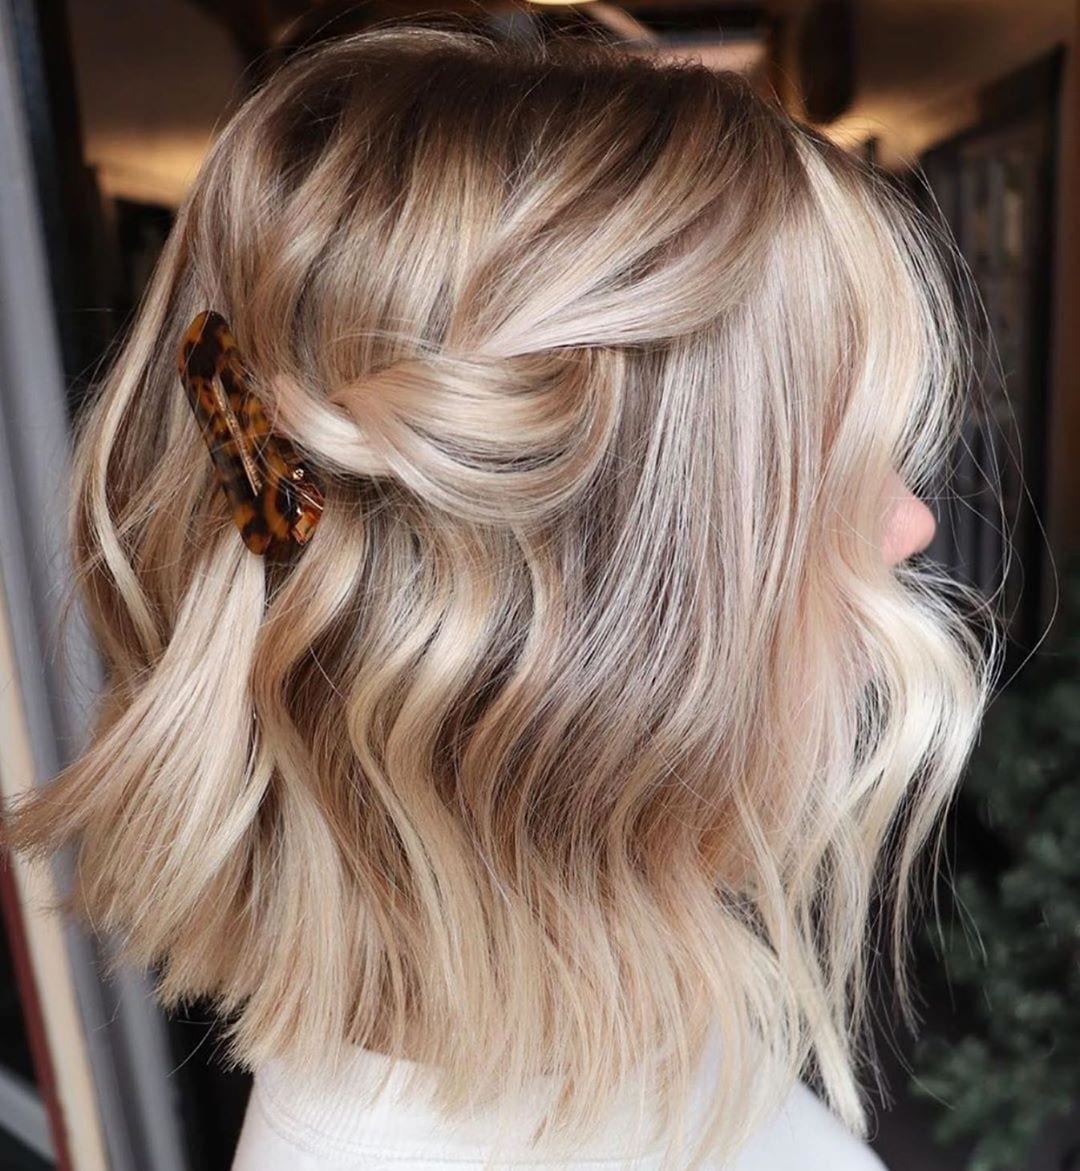 20 Cute Bob Haircuts & Hairstyles For Women to Try This Year